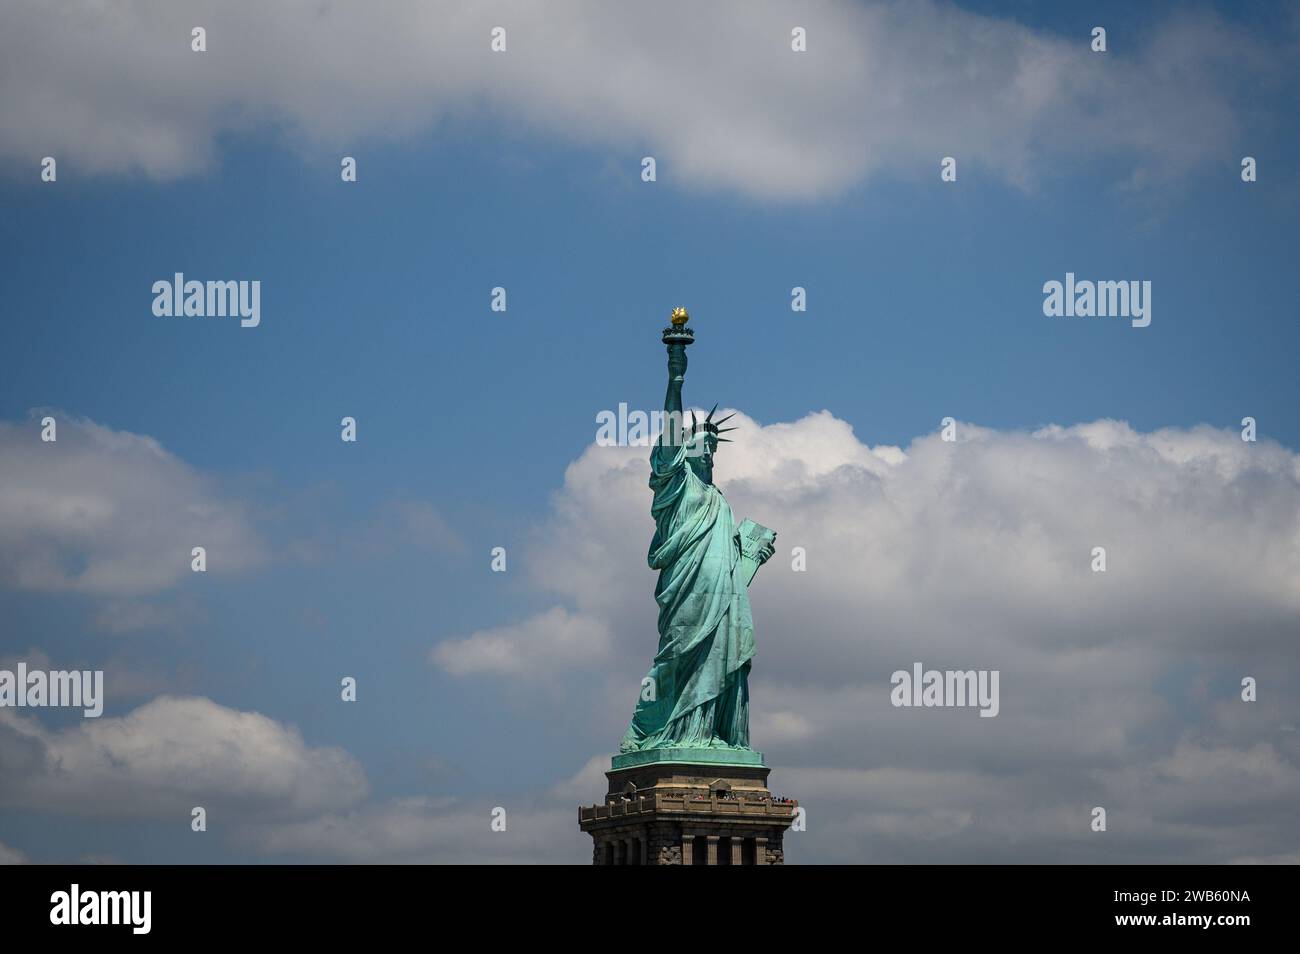 New York's Statue of Liberty in the center of the image with blue sky and clouds. Stock Photo